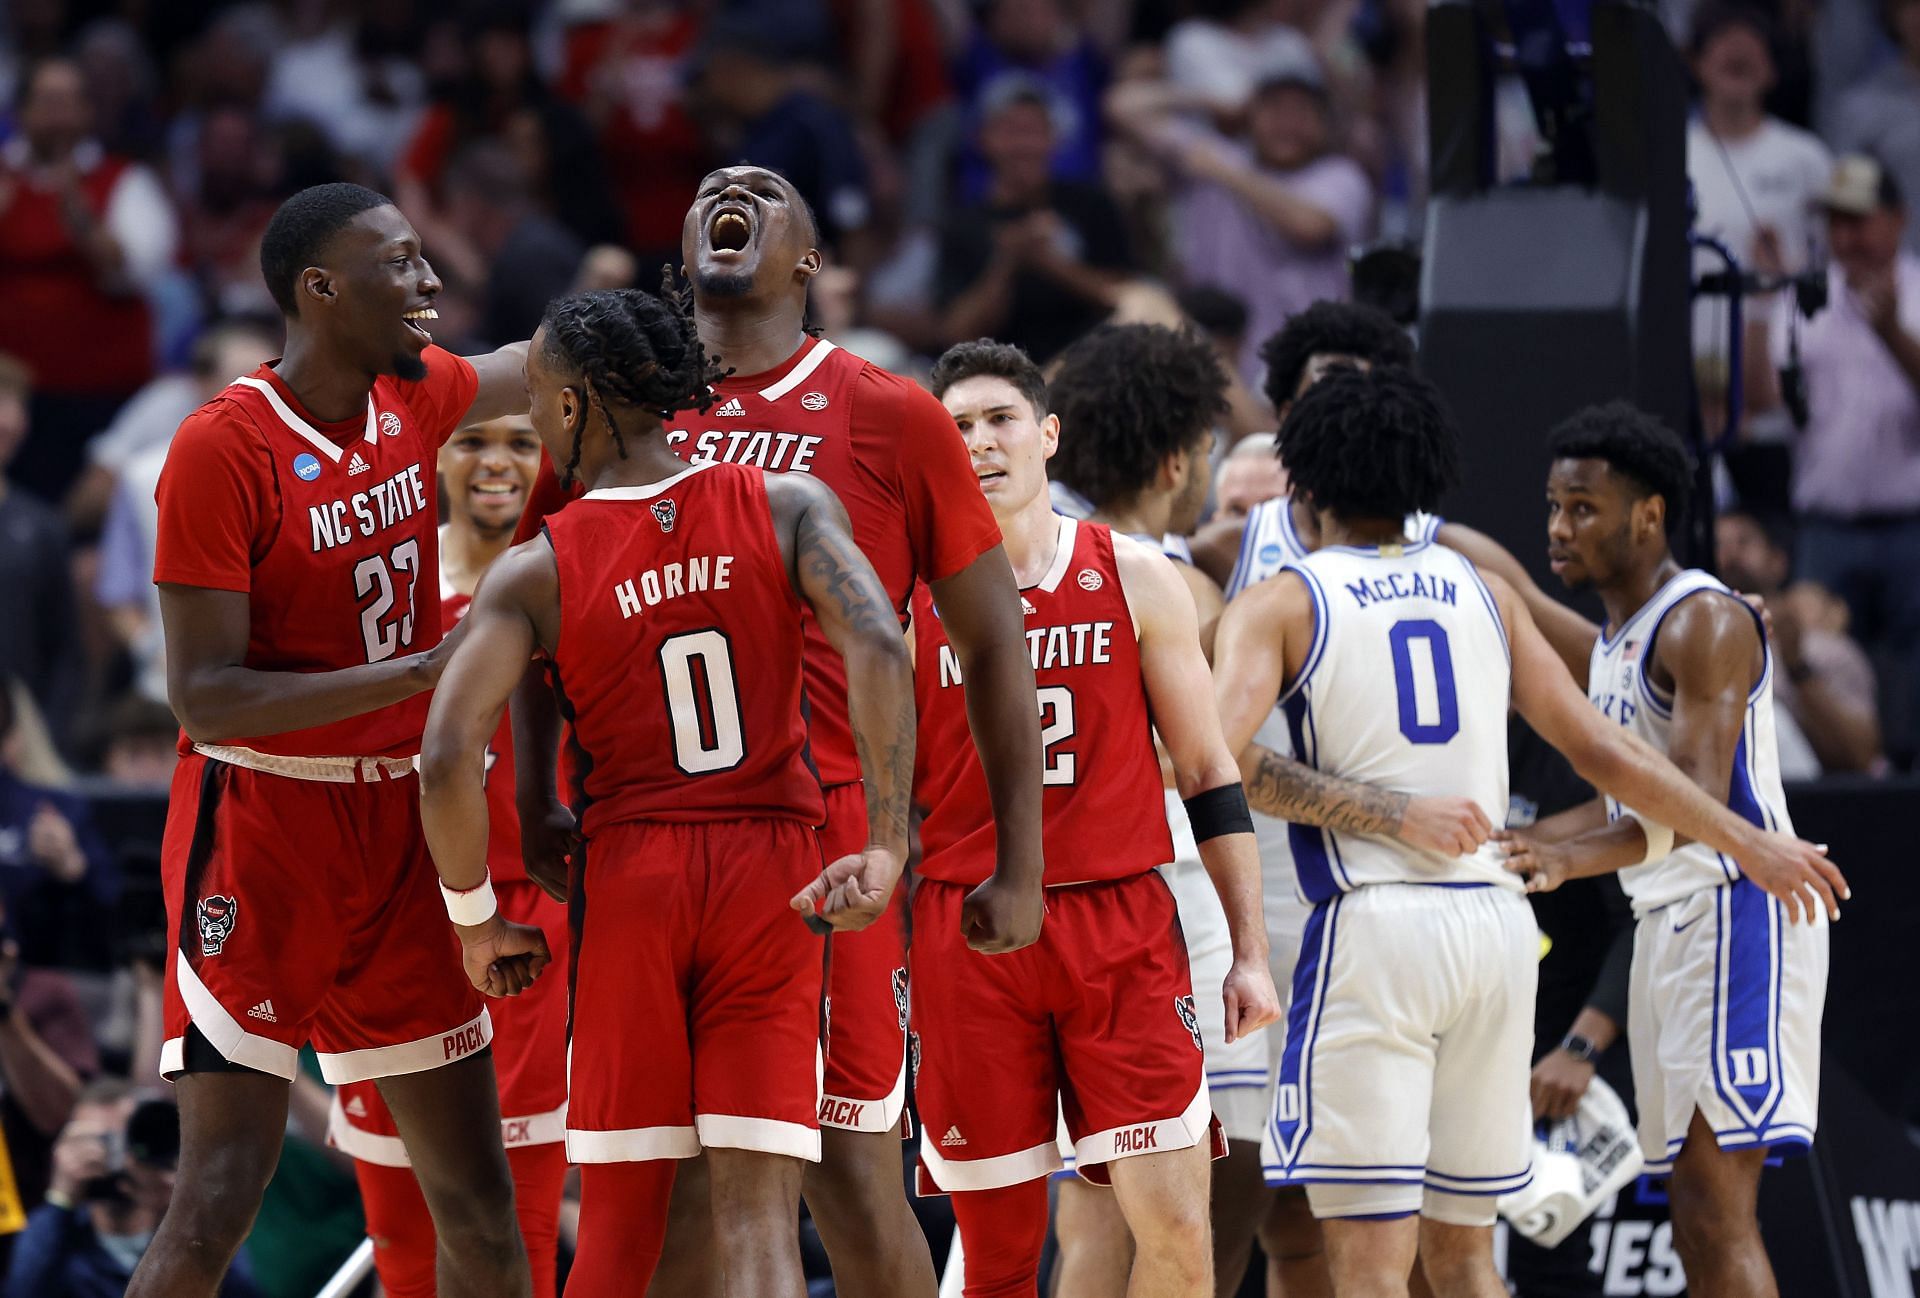 NC State is heading to the Final Four on a nine-game winning streak.